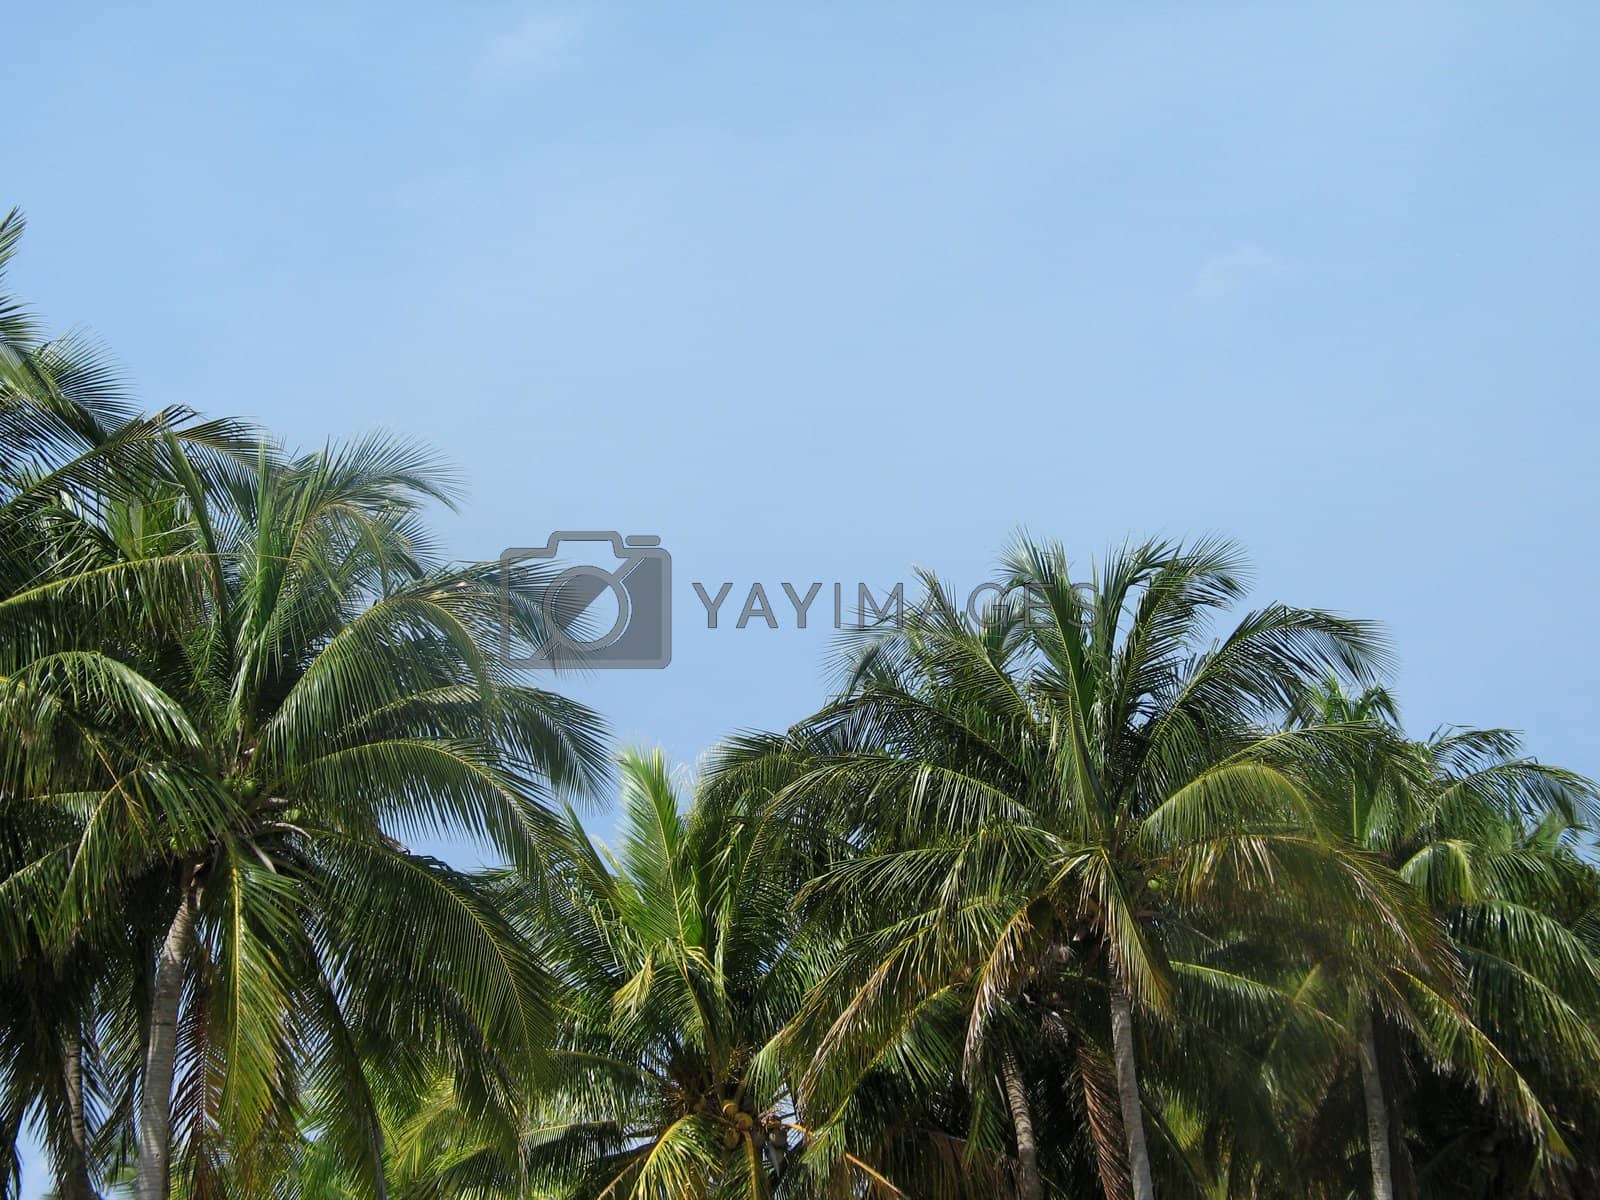 Royalty free image of palm trees by mmm